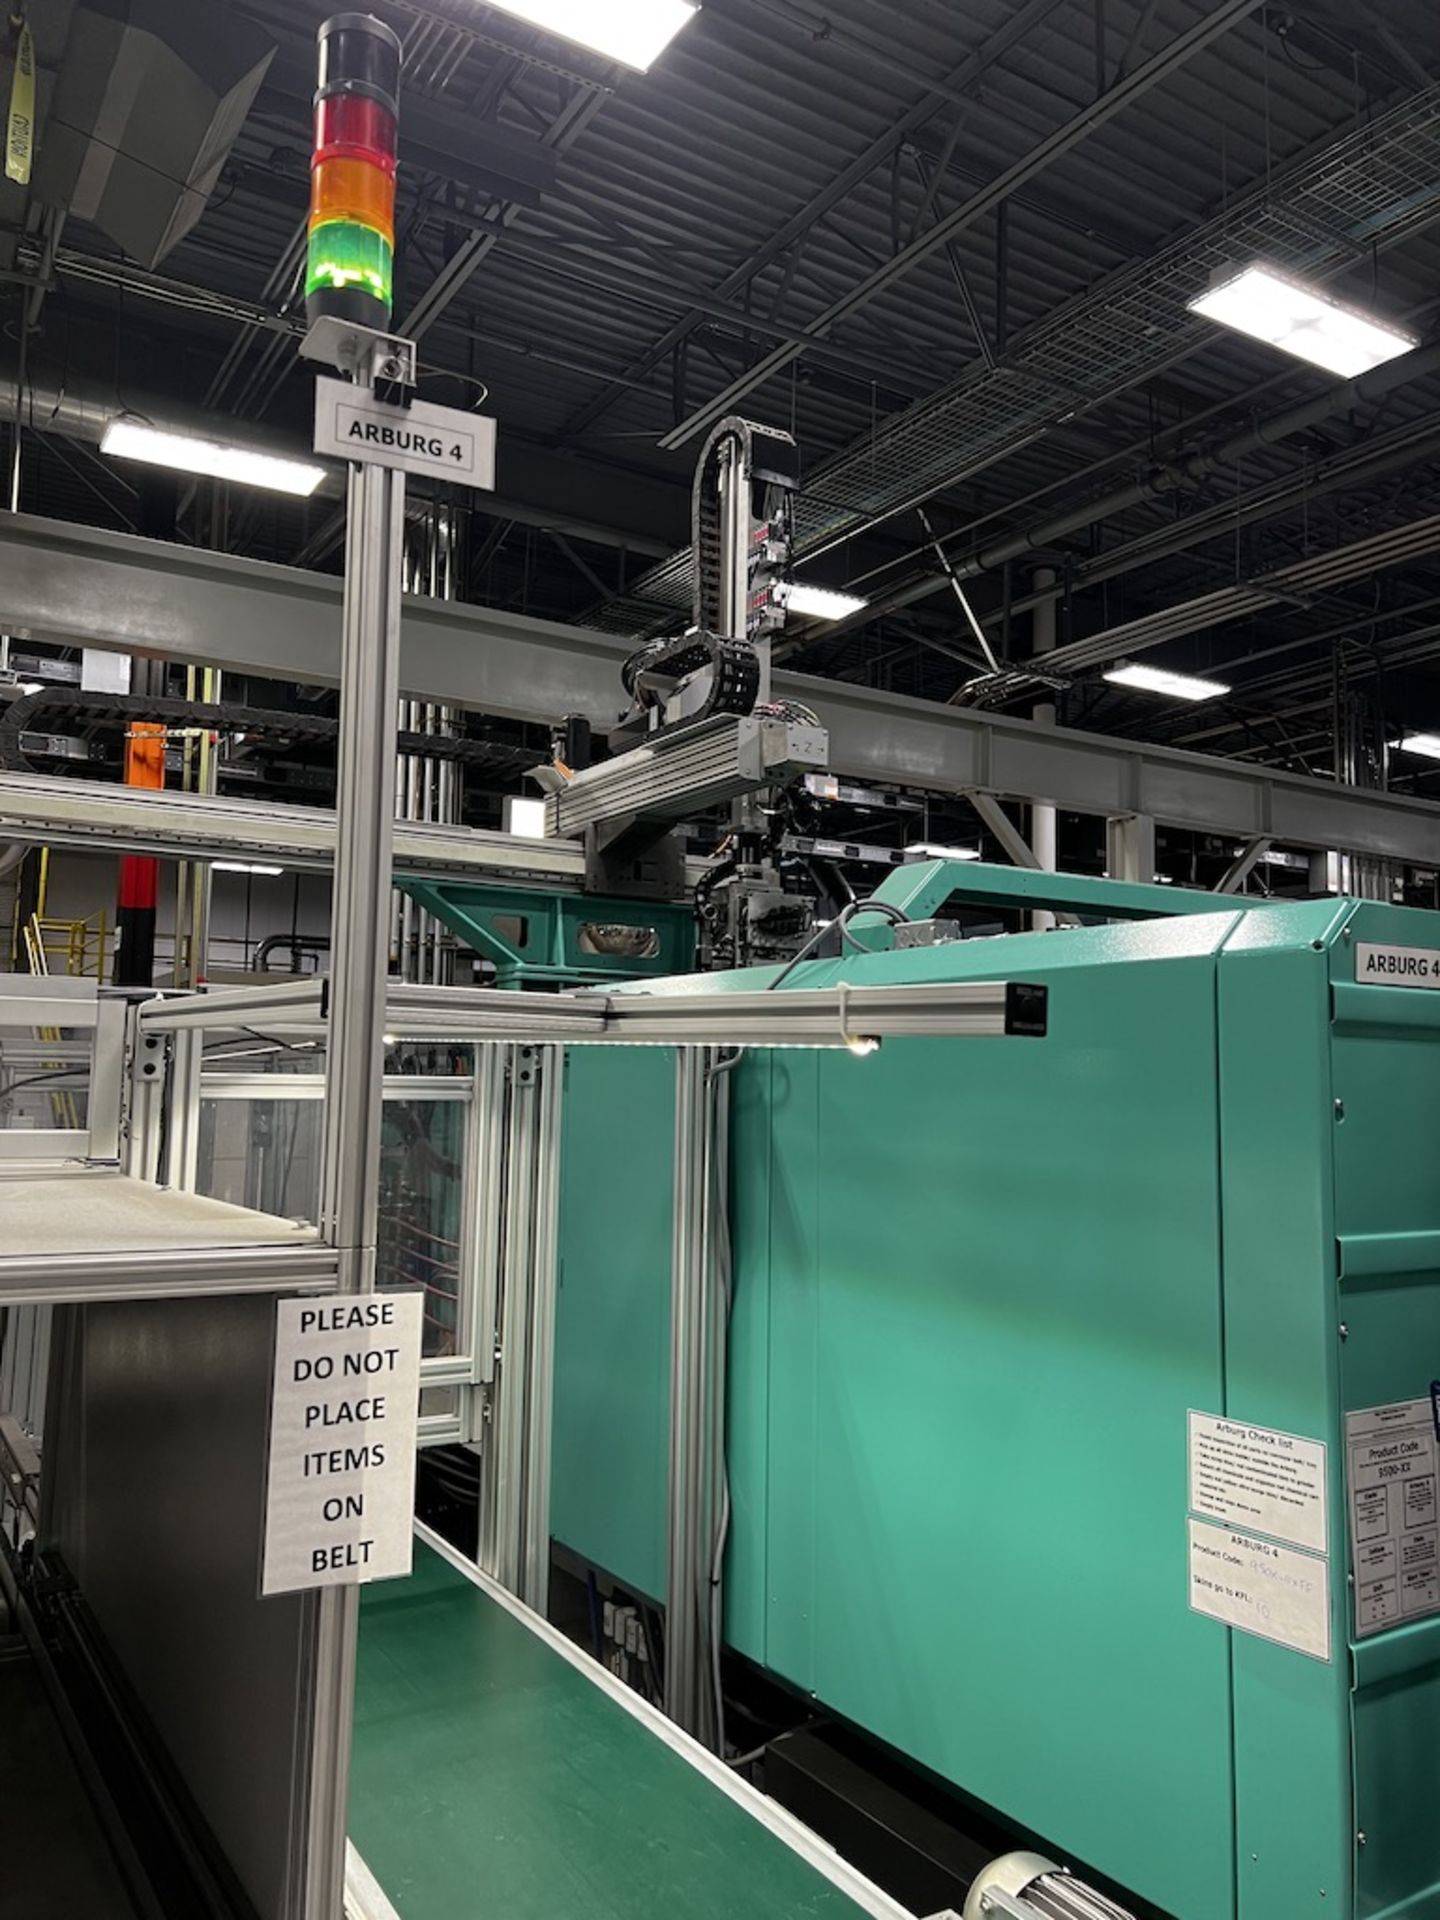 Arburg 320 Ton Injection Molding Press w/Integrated Arburg Robot, New in 2014 - Image 4 of 4